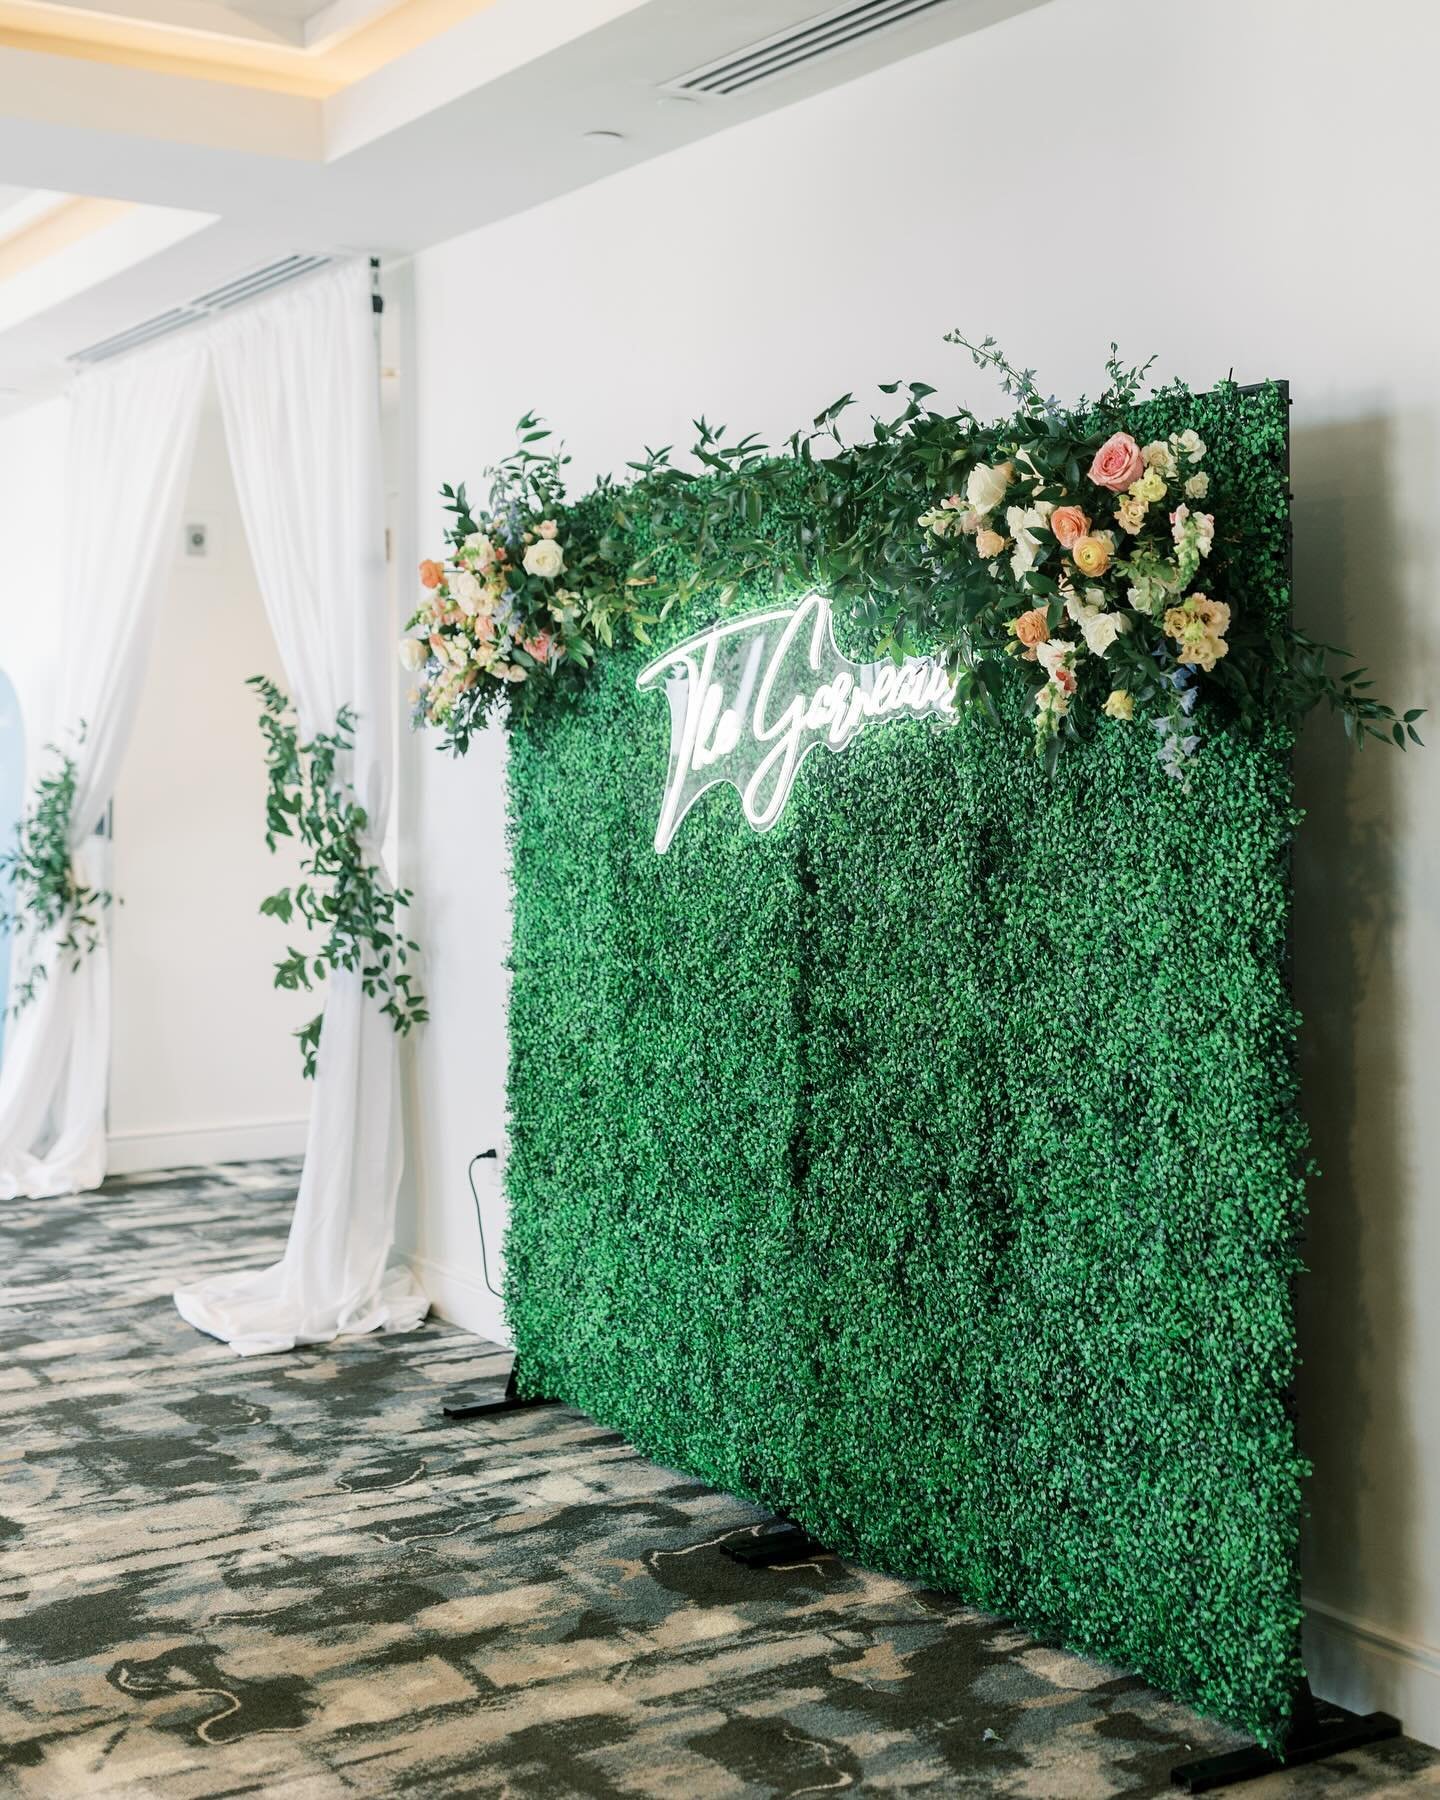 We are always looking for ways to make every detail feel unique to our couples &mdash; we love that for this photo-booth, we opted to upgrade their neon sign by using their new last name. This made the moment more personalized + gave them the perfect